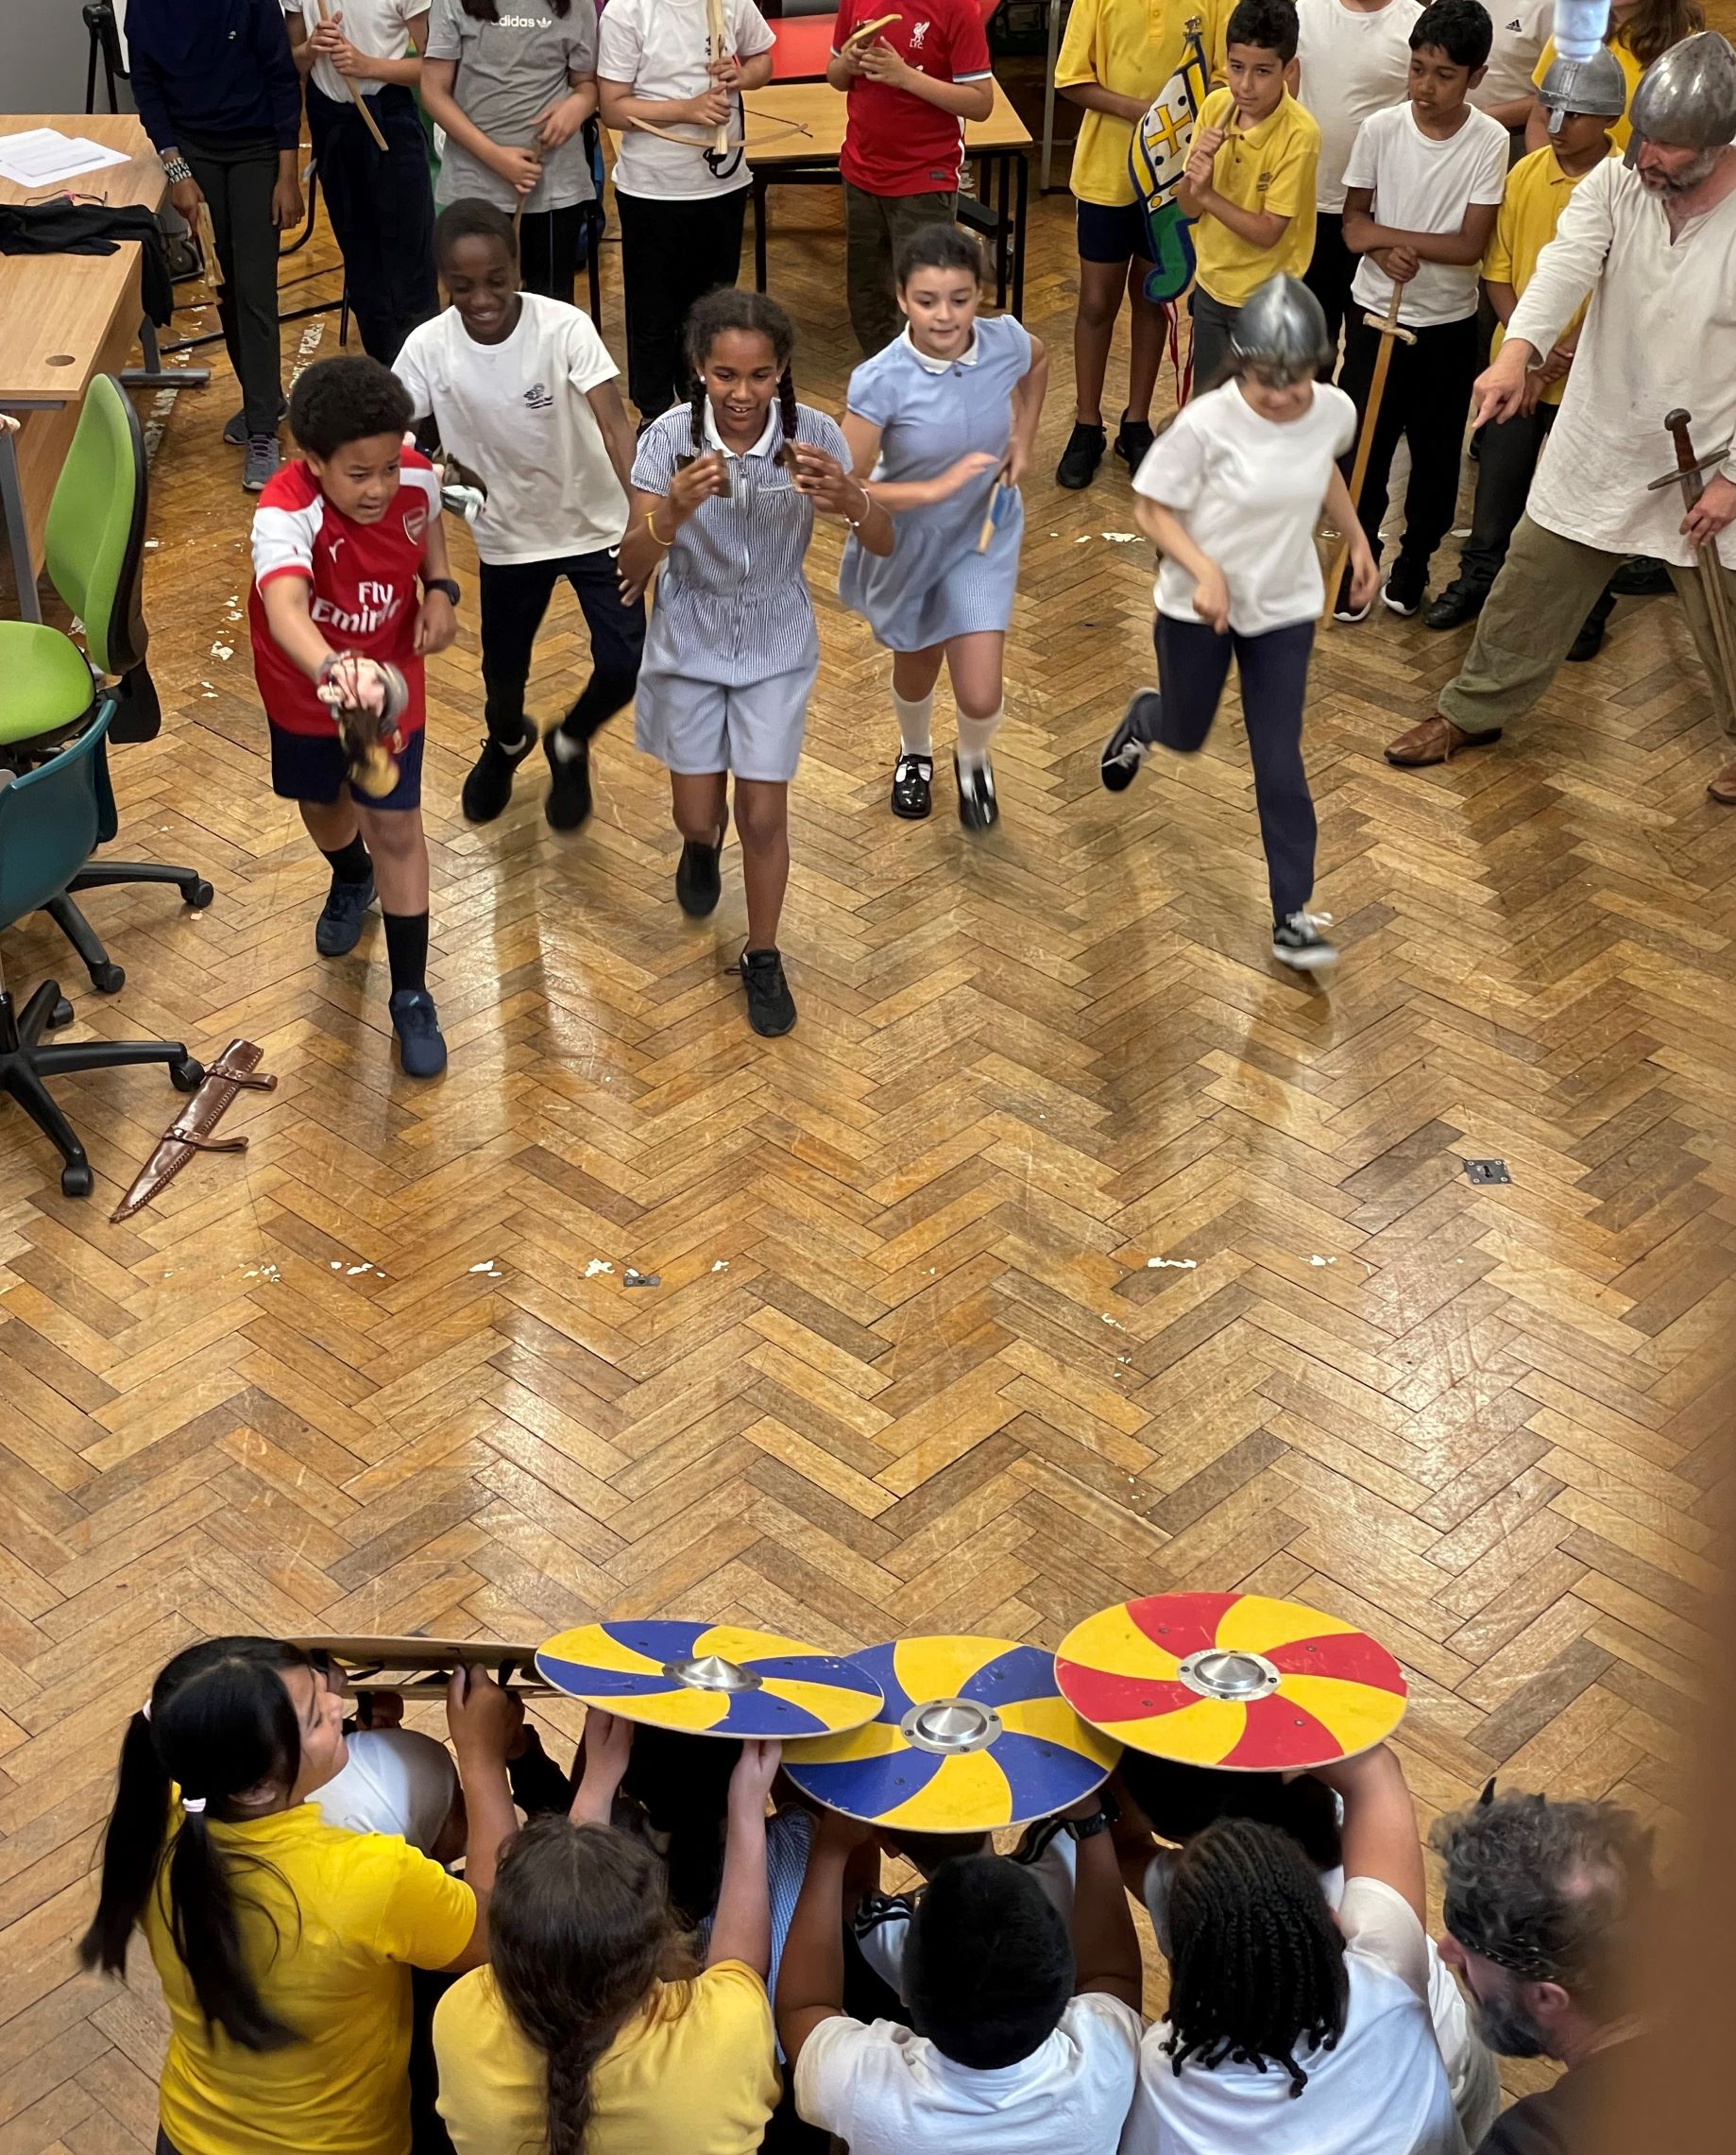 School children dressed up and re-enacting a battle in a hall